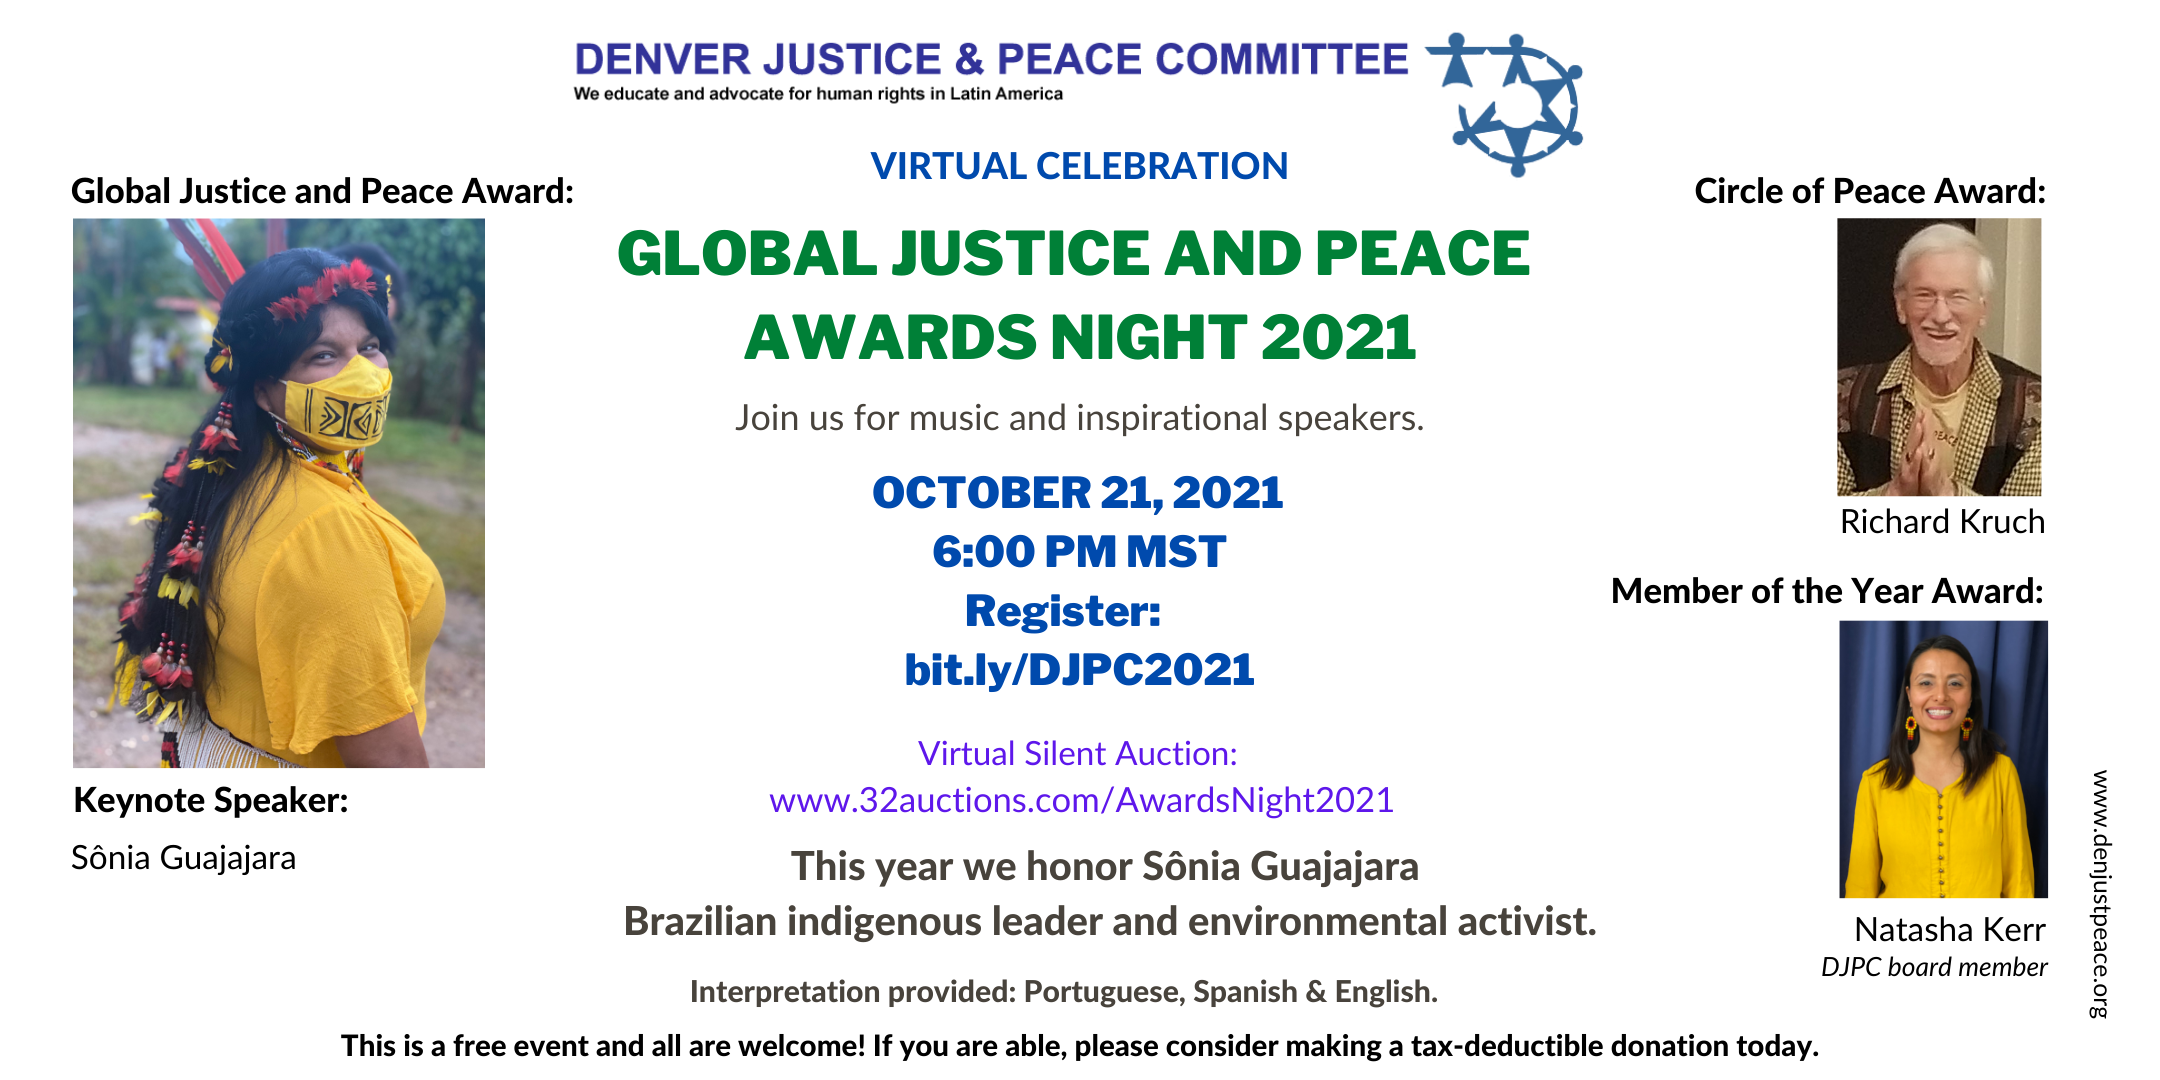 (English) You are invited to our 2021 Virtual Annual Global Justice and Peace Awards Night.